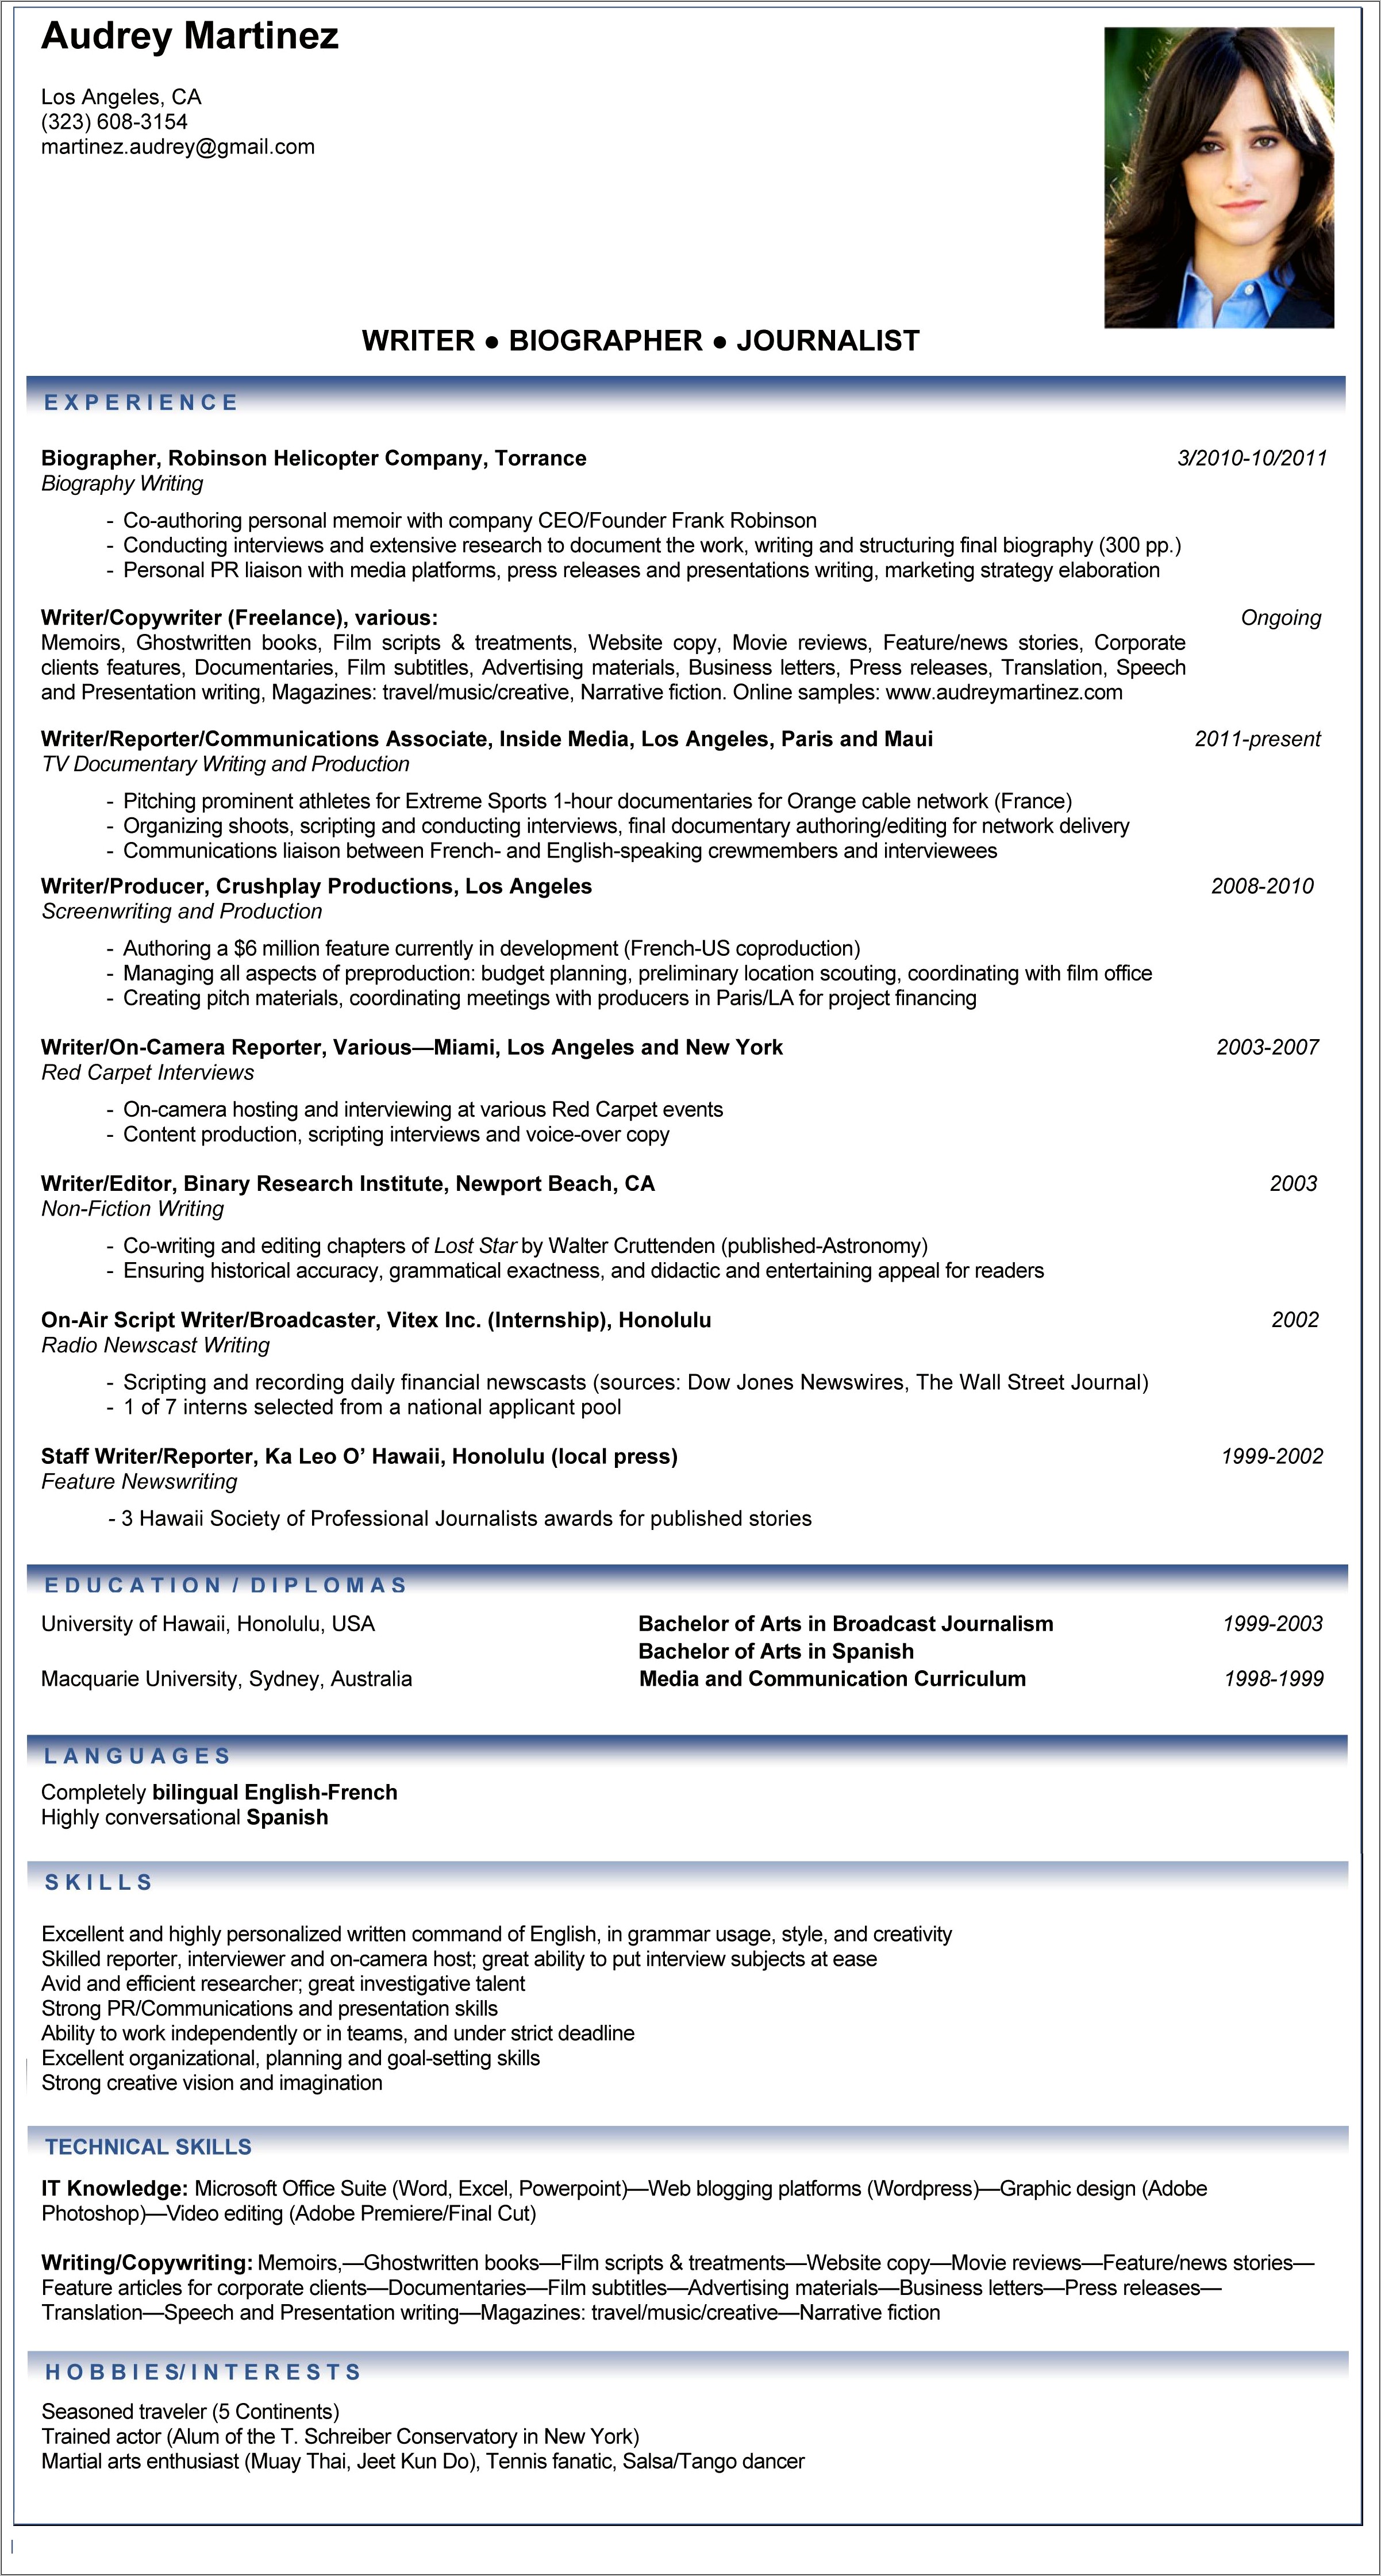 Creating A Resume In Word 2003